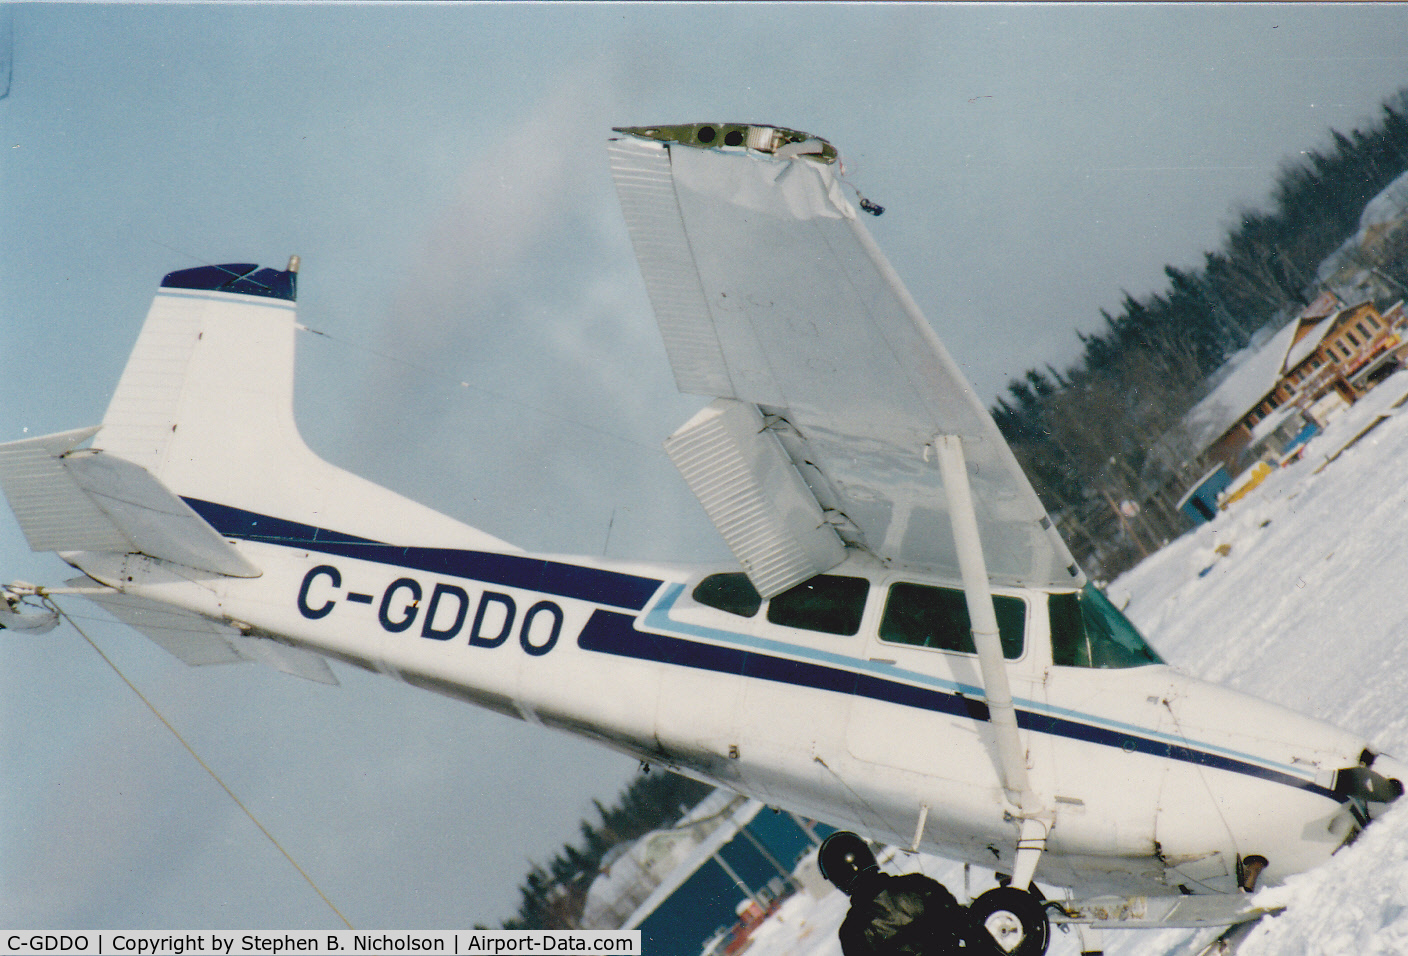 C-GDDO, 1976 Cessna 180J Skywagon C/N 180-52652, One fine day in January 1993 I looked out my window to see this...